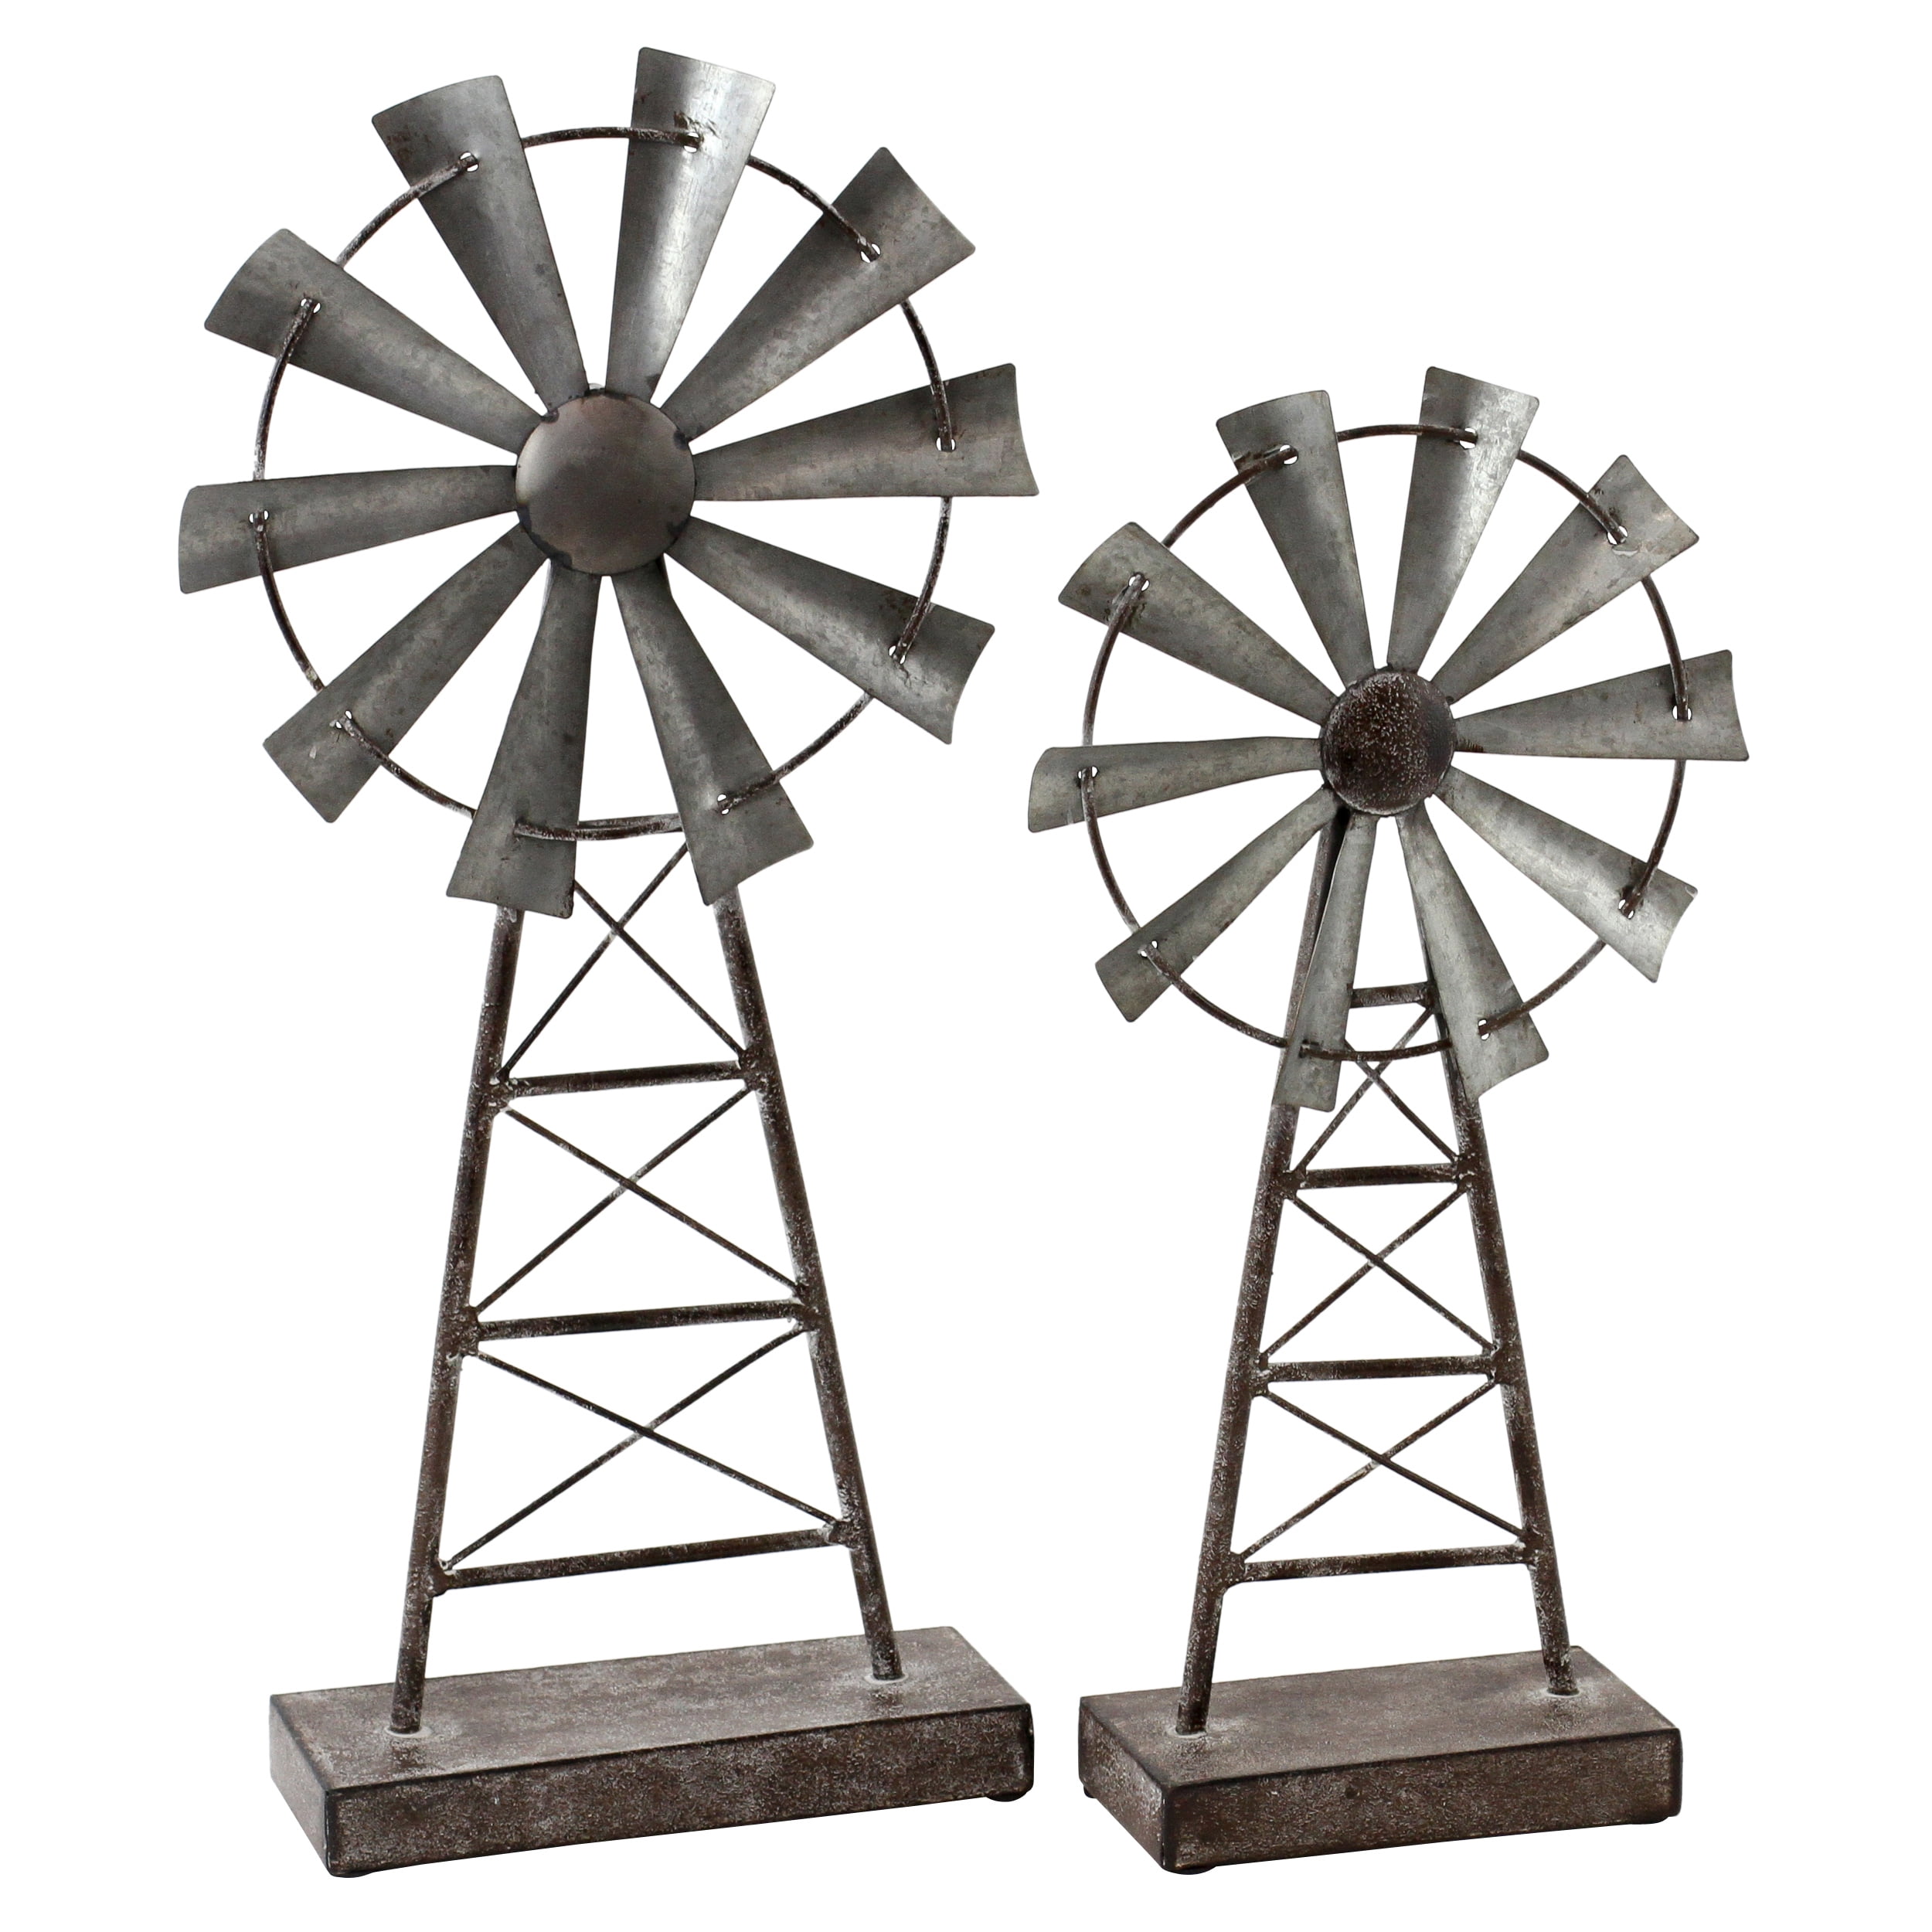 Set Of 2 Rustic Farmhouse Metal Windmill Table Top Decor Models Distressed Gray 